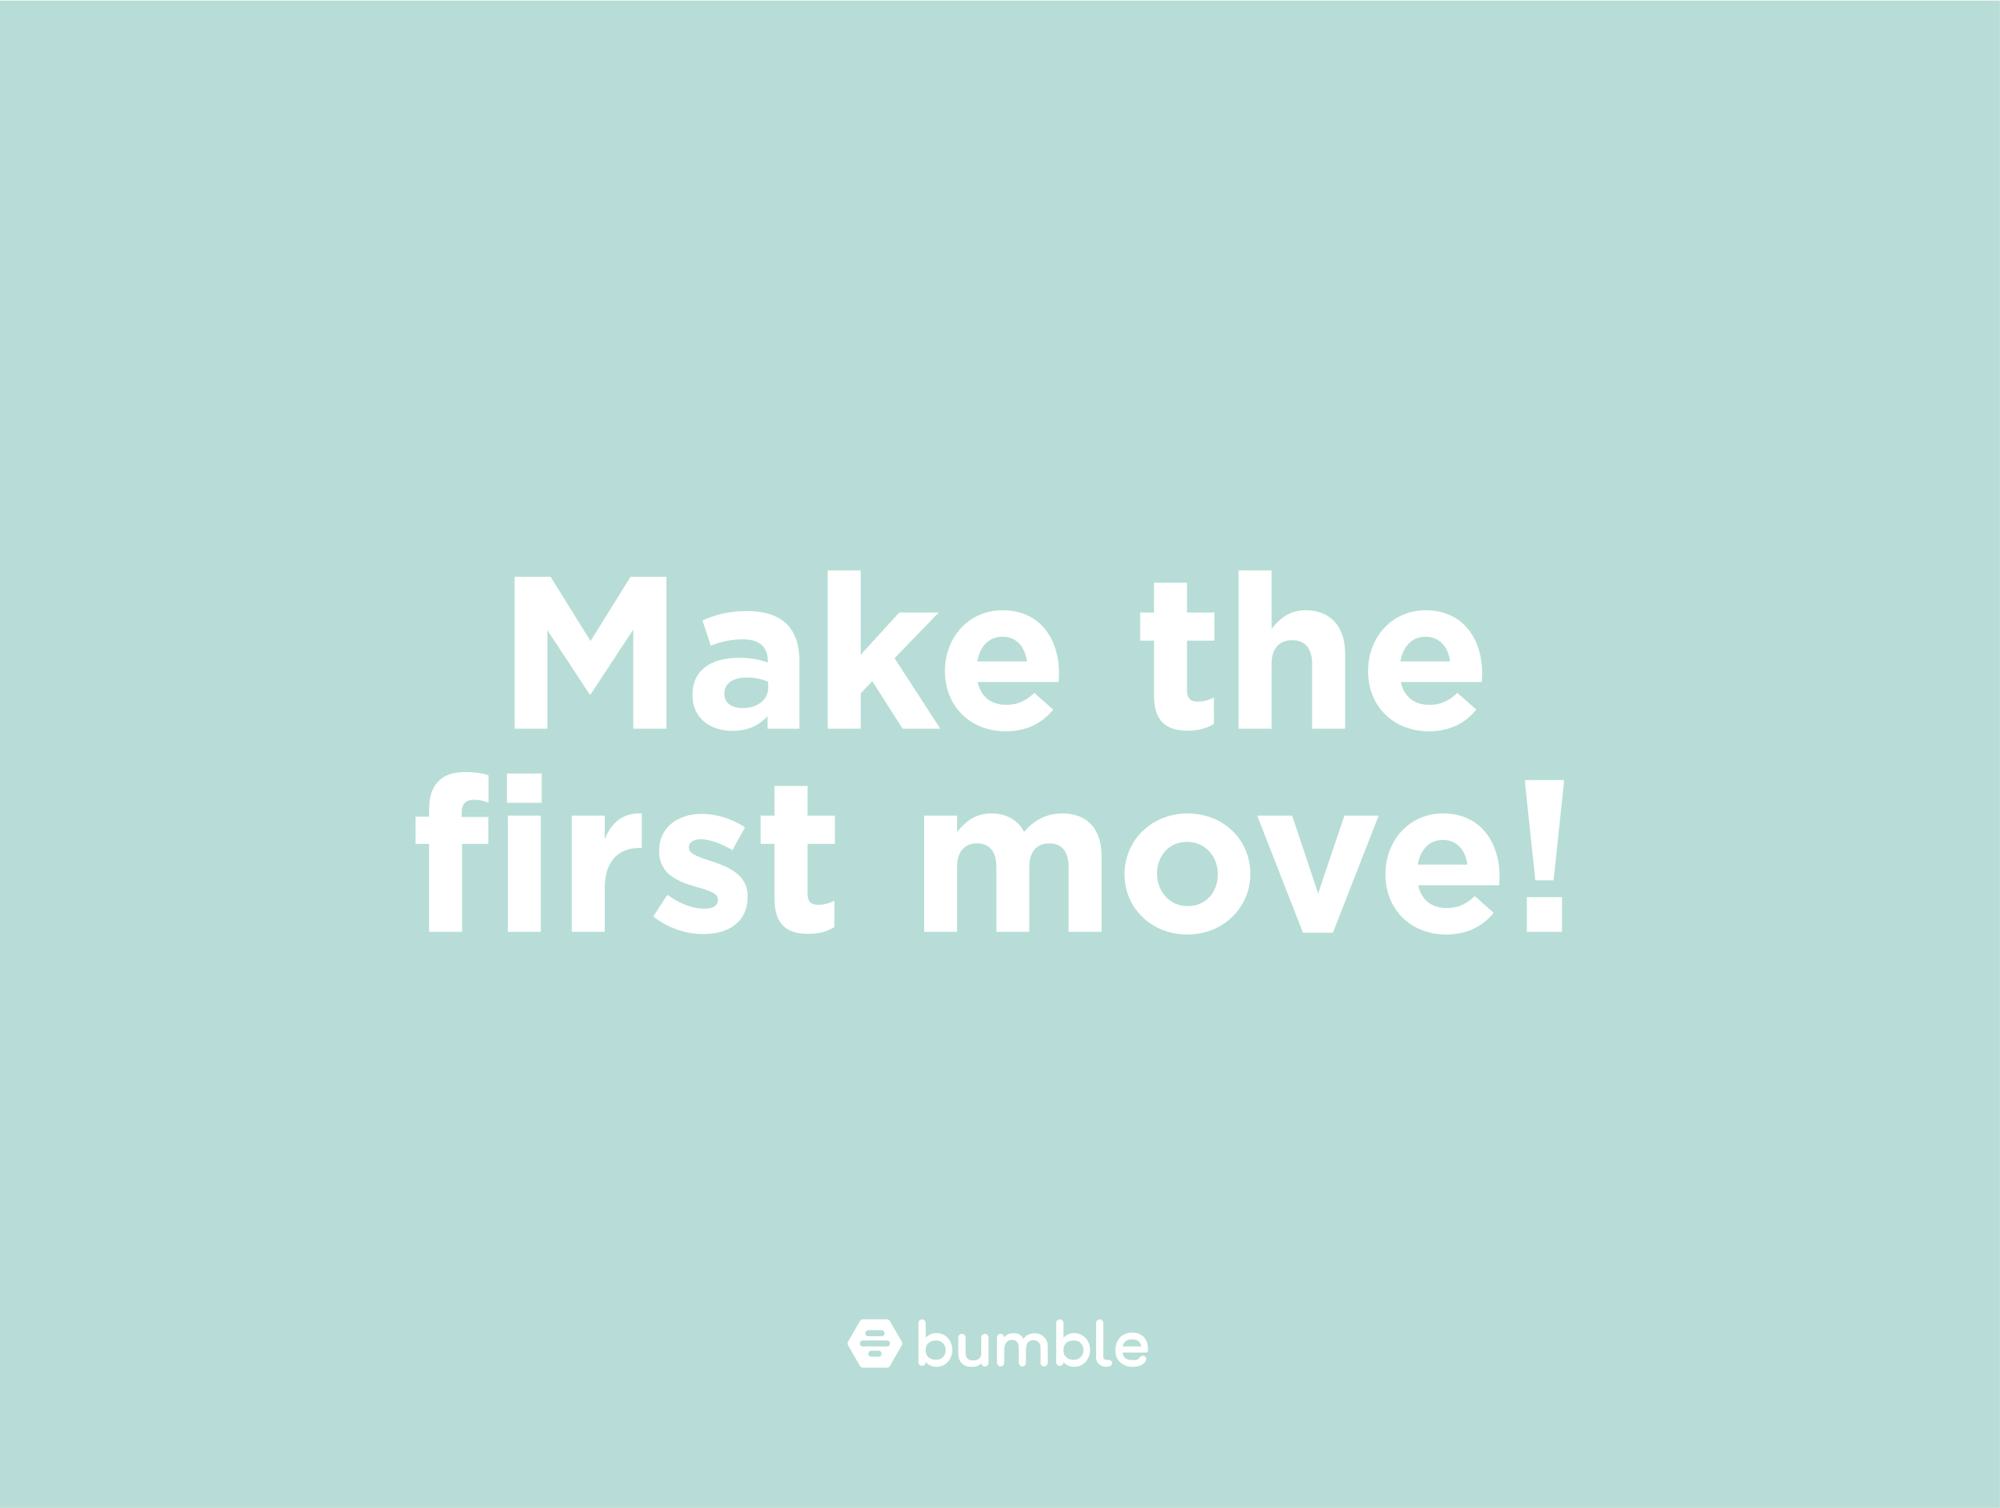 Bumble - Making the first move